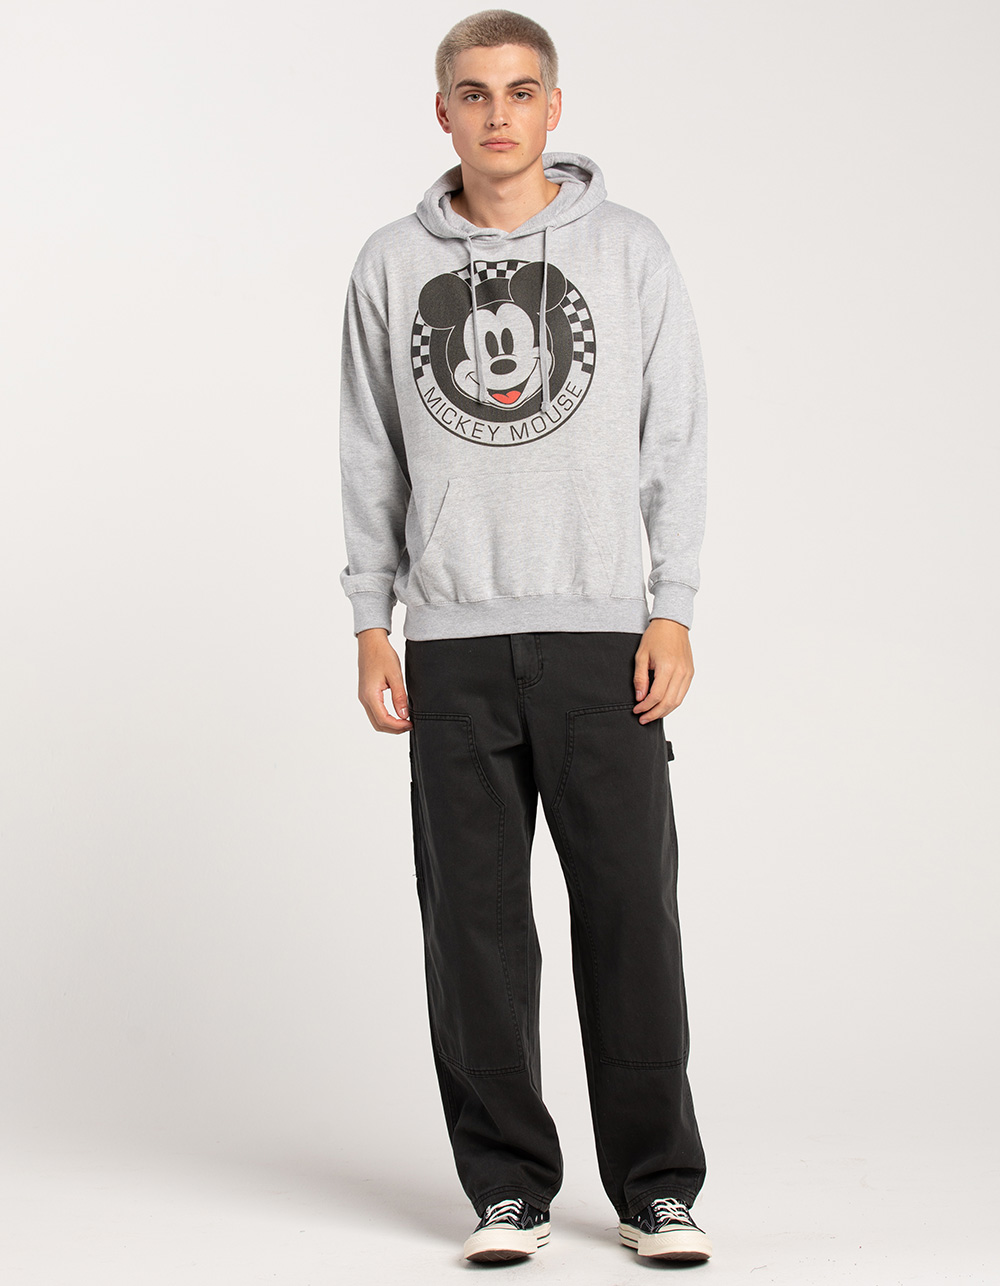 DISNEY Mickey Mouse Checkered Unisex Hoodie - HEATHER GRAY